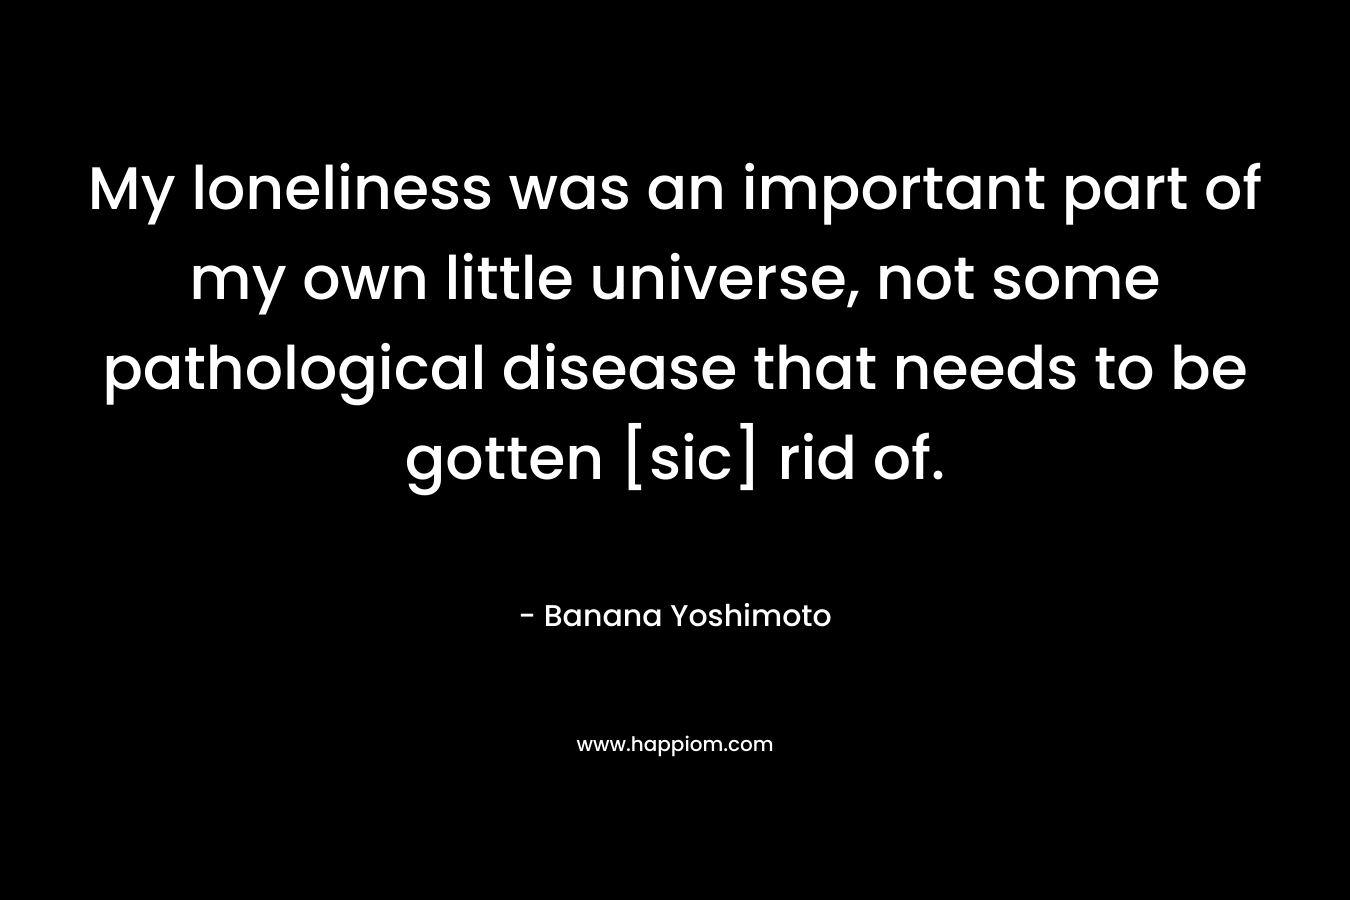 My loneliness was an important part of my own little universe, not some pathological disease that needs to be gotten [sic] rid of. – Banana Yoshimoto